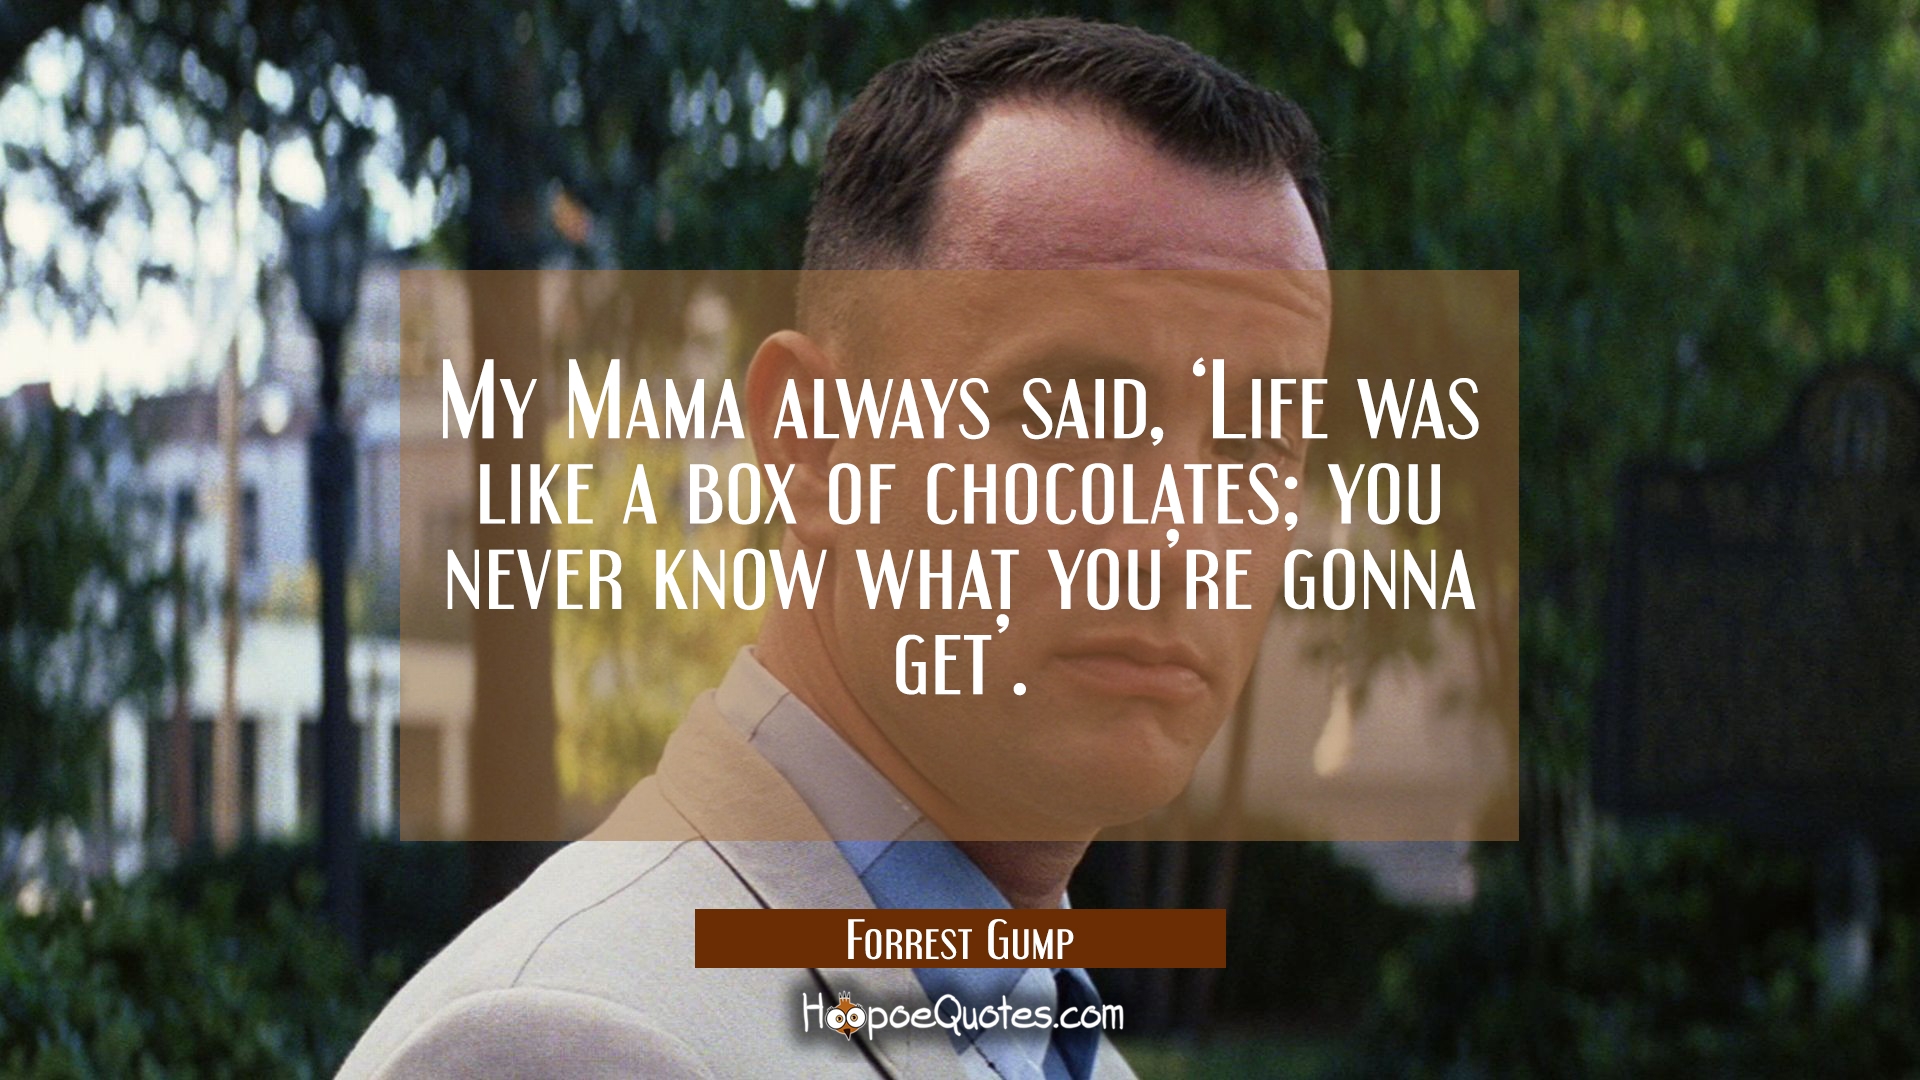 you must have heard of the famous saying 'life is like a box of chocol...